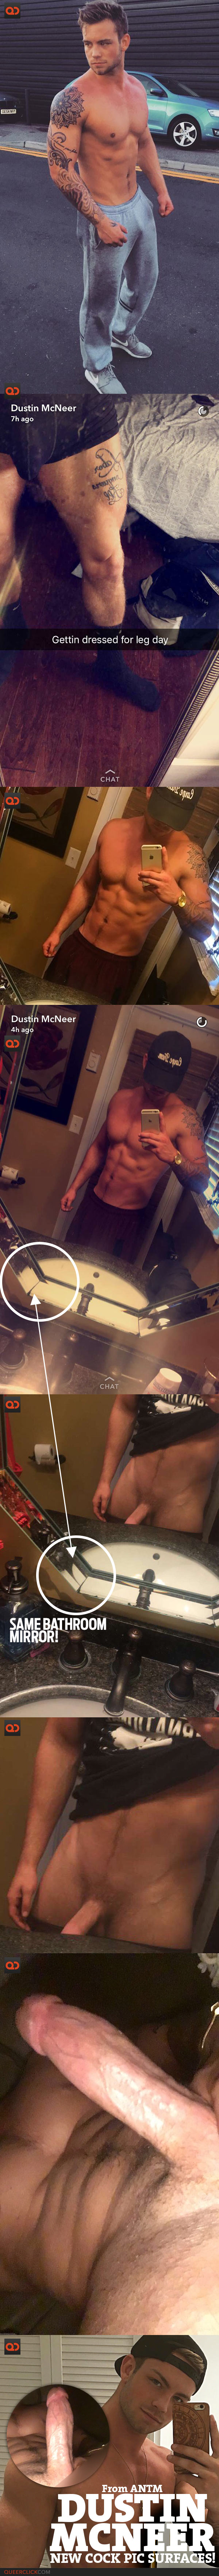 Dustin McNeer, From ANTM, New Cock Pic Surfaces!